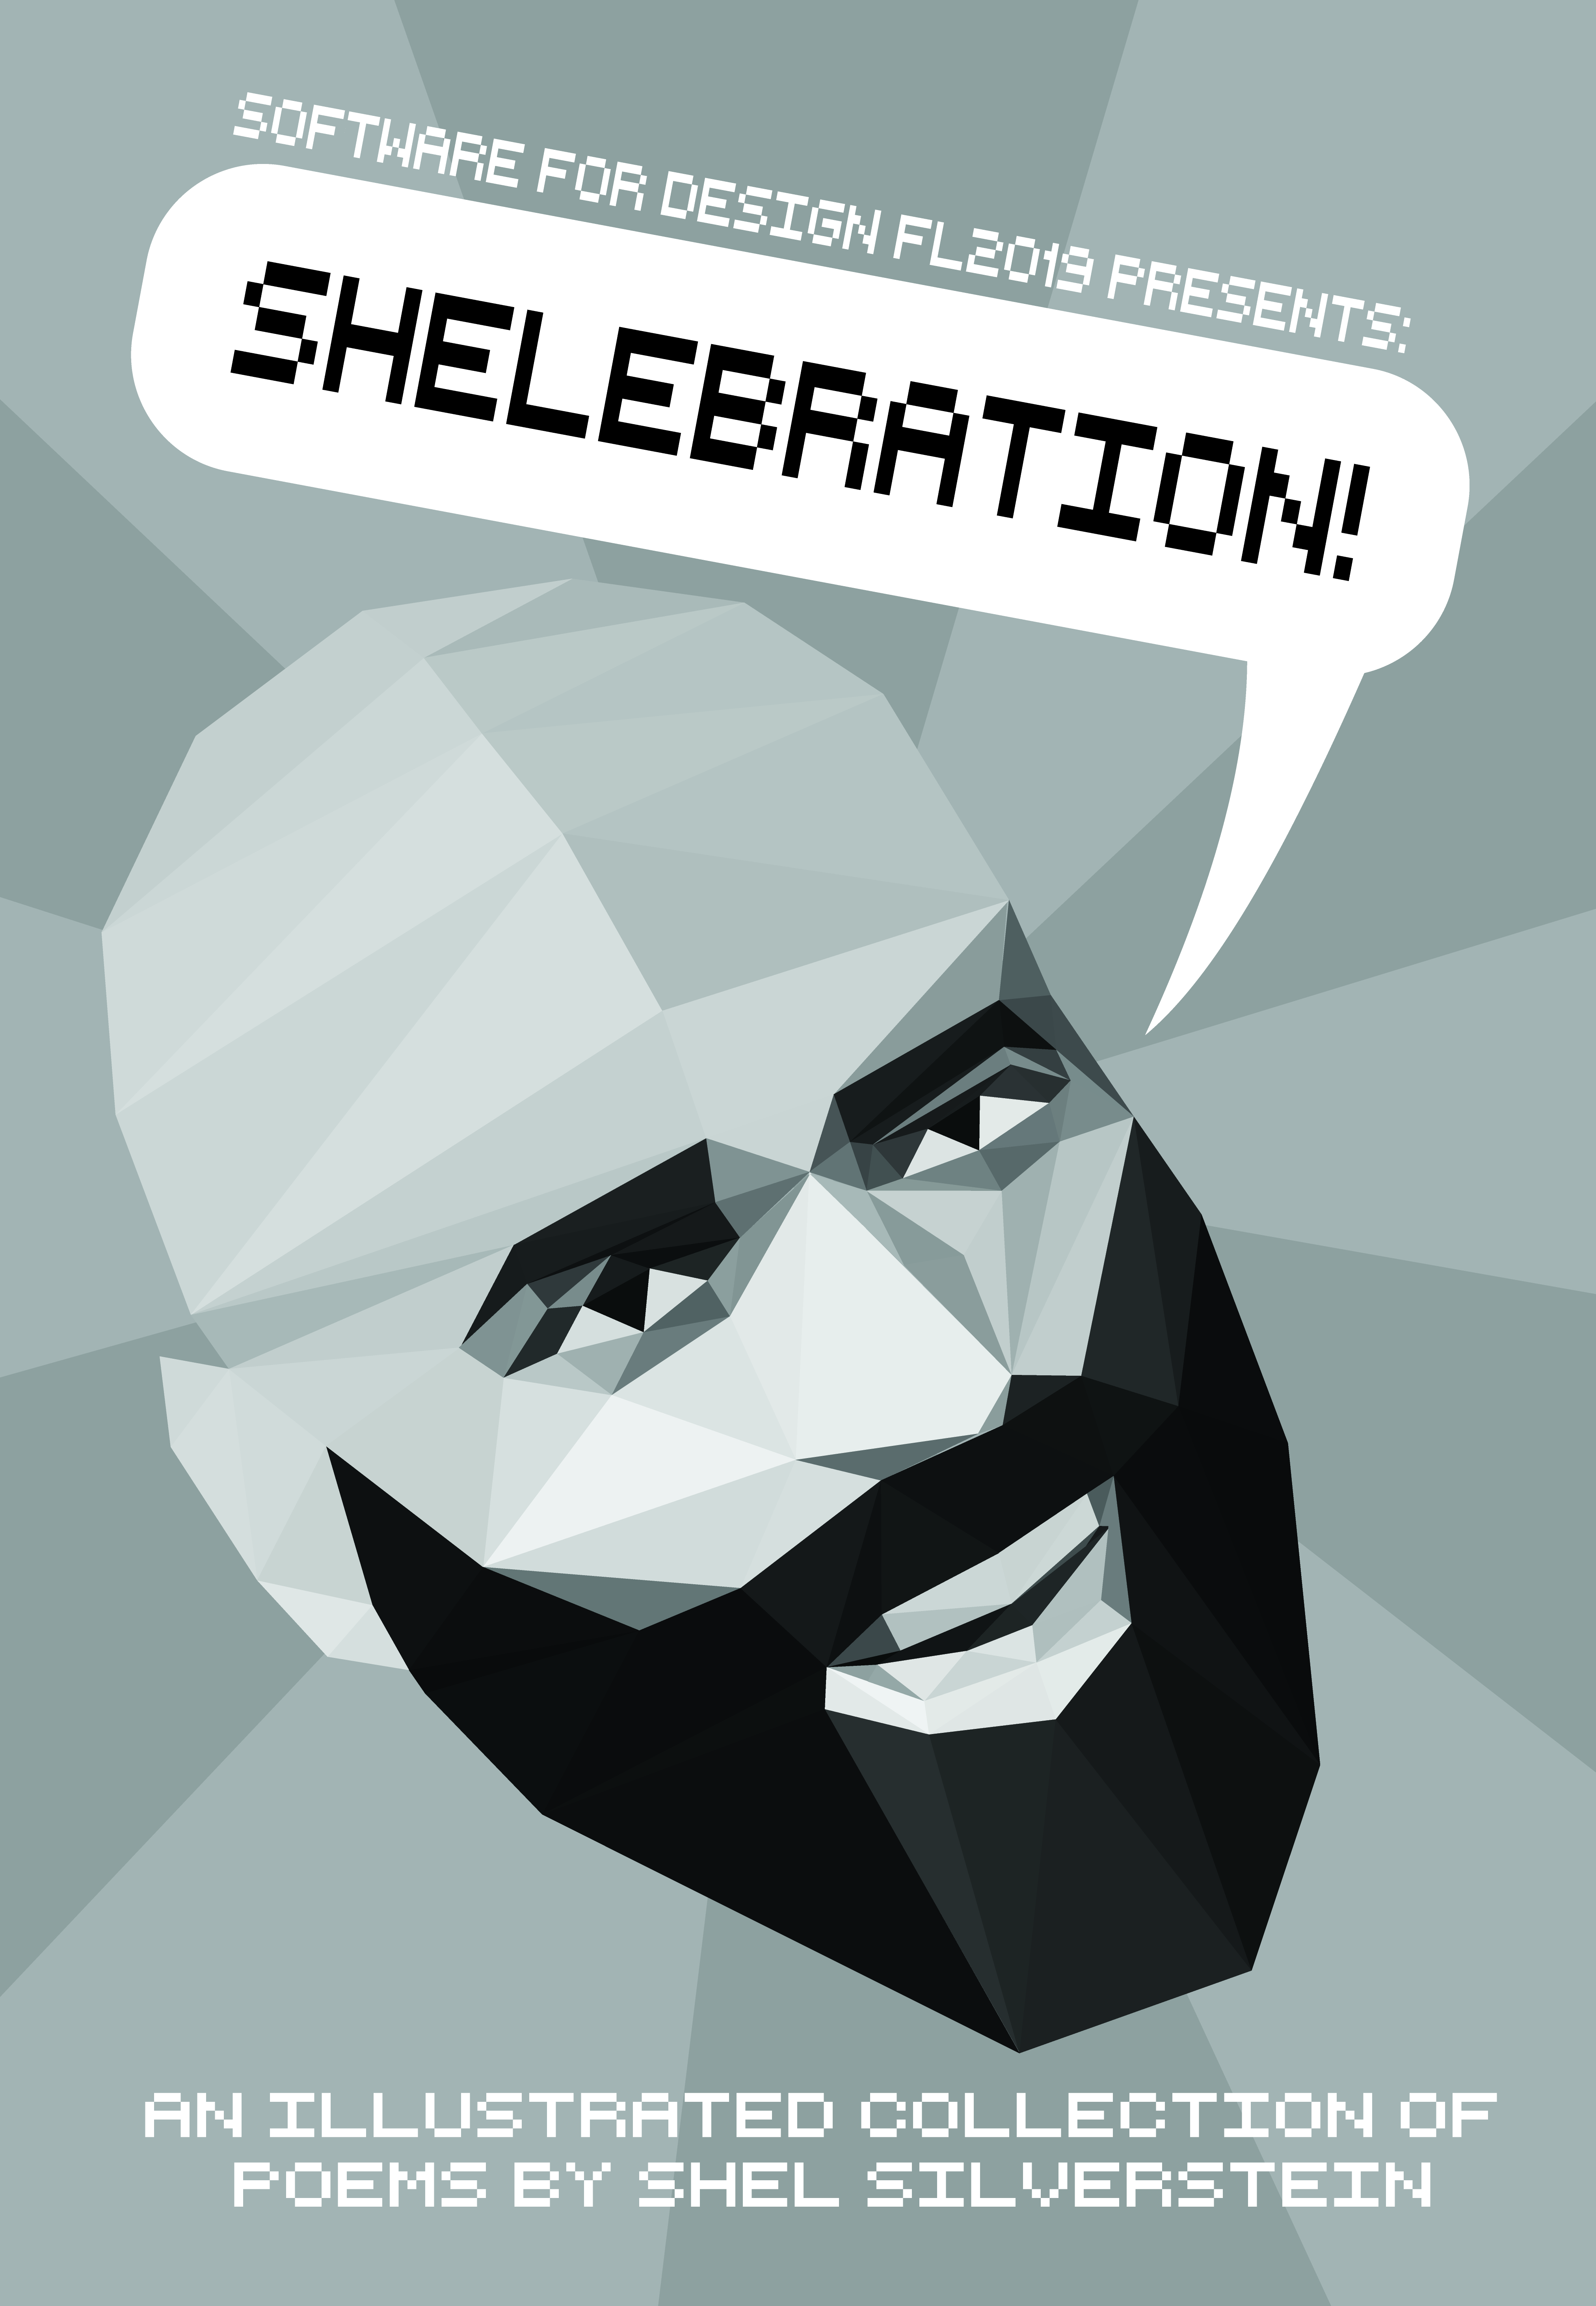 My final portrait of Shel, it makes use of a low-poly art style, where shapes are made up of several different sized triangles. A speech bubble reads 'Shelebration' above his head.